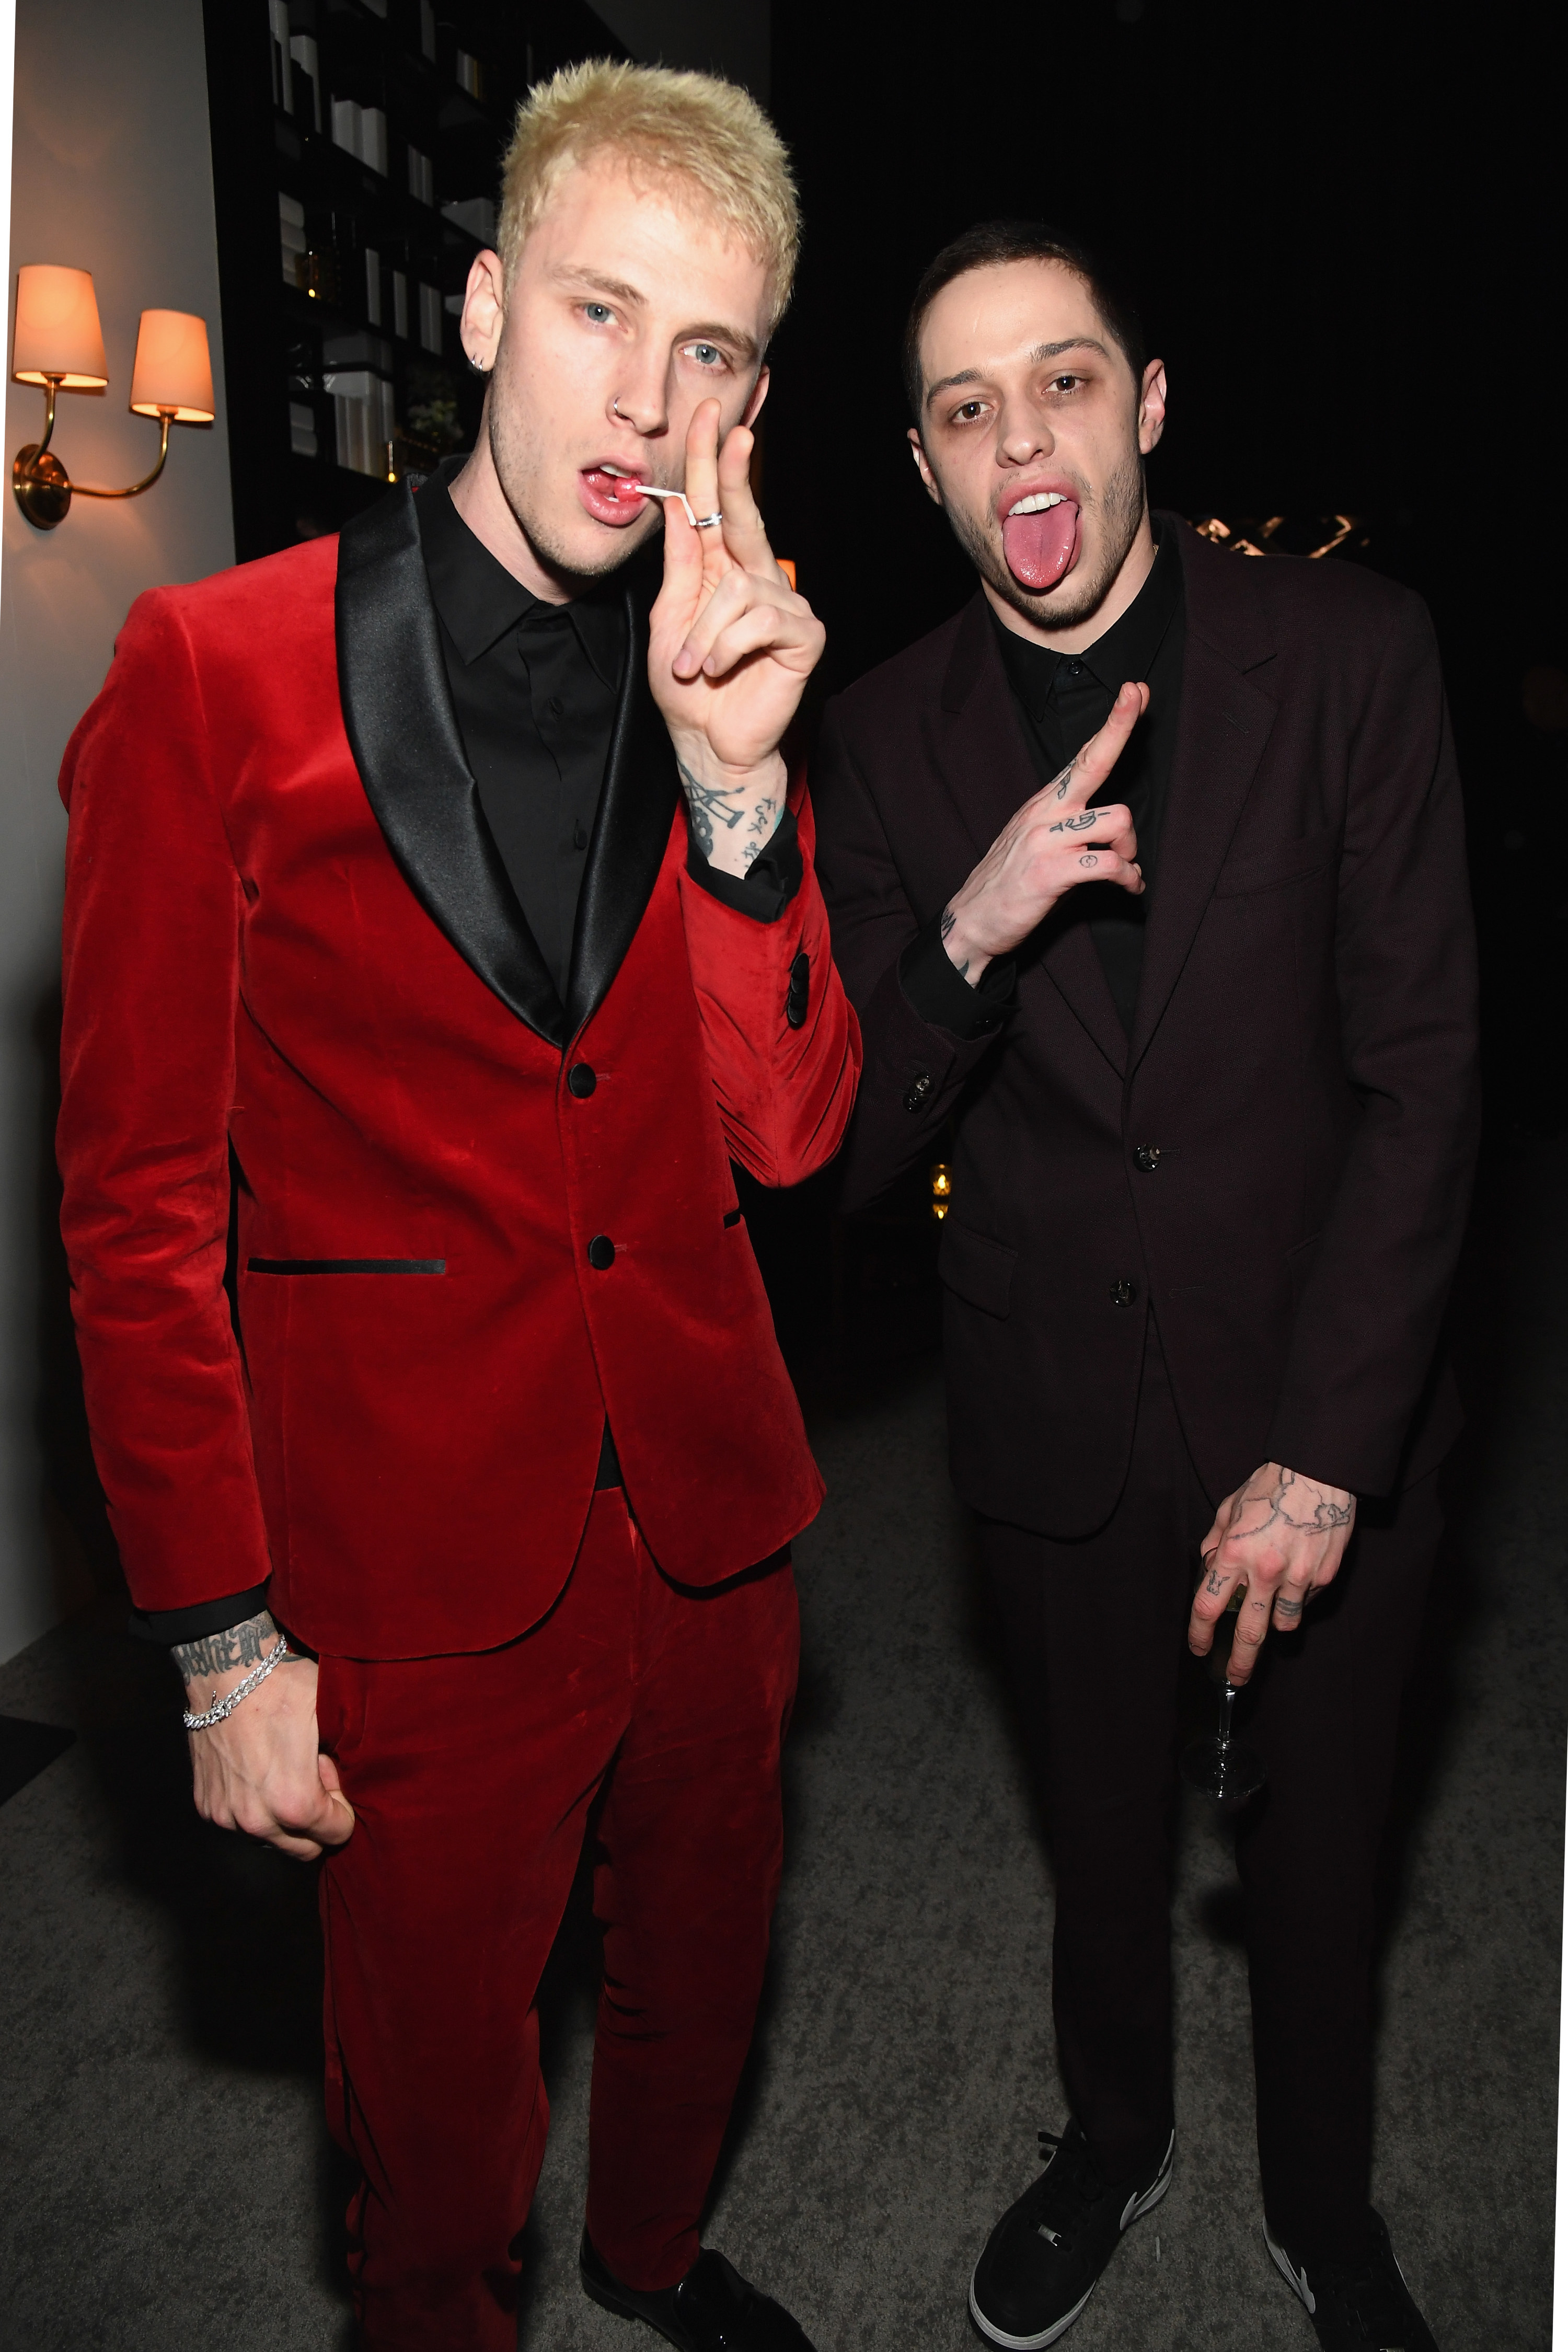 MGK and Pete with their tongues out at a party